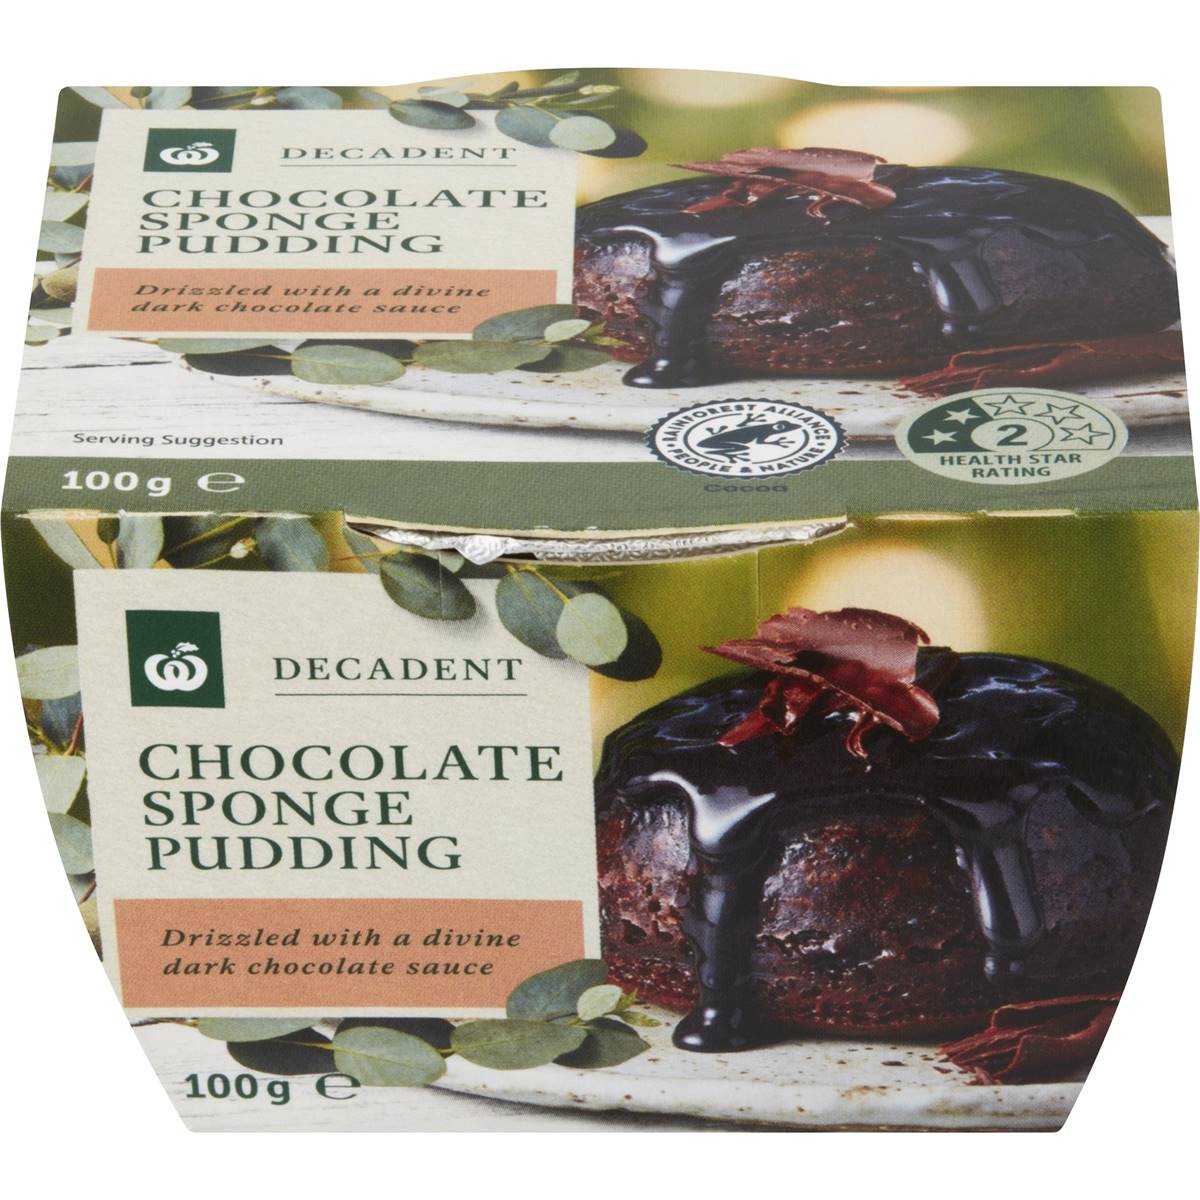 Calories in Woolworths Choc Pudding